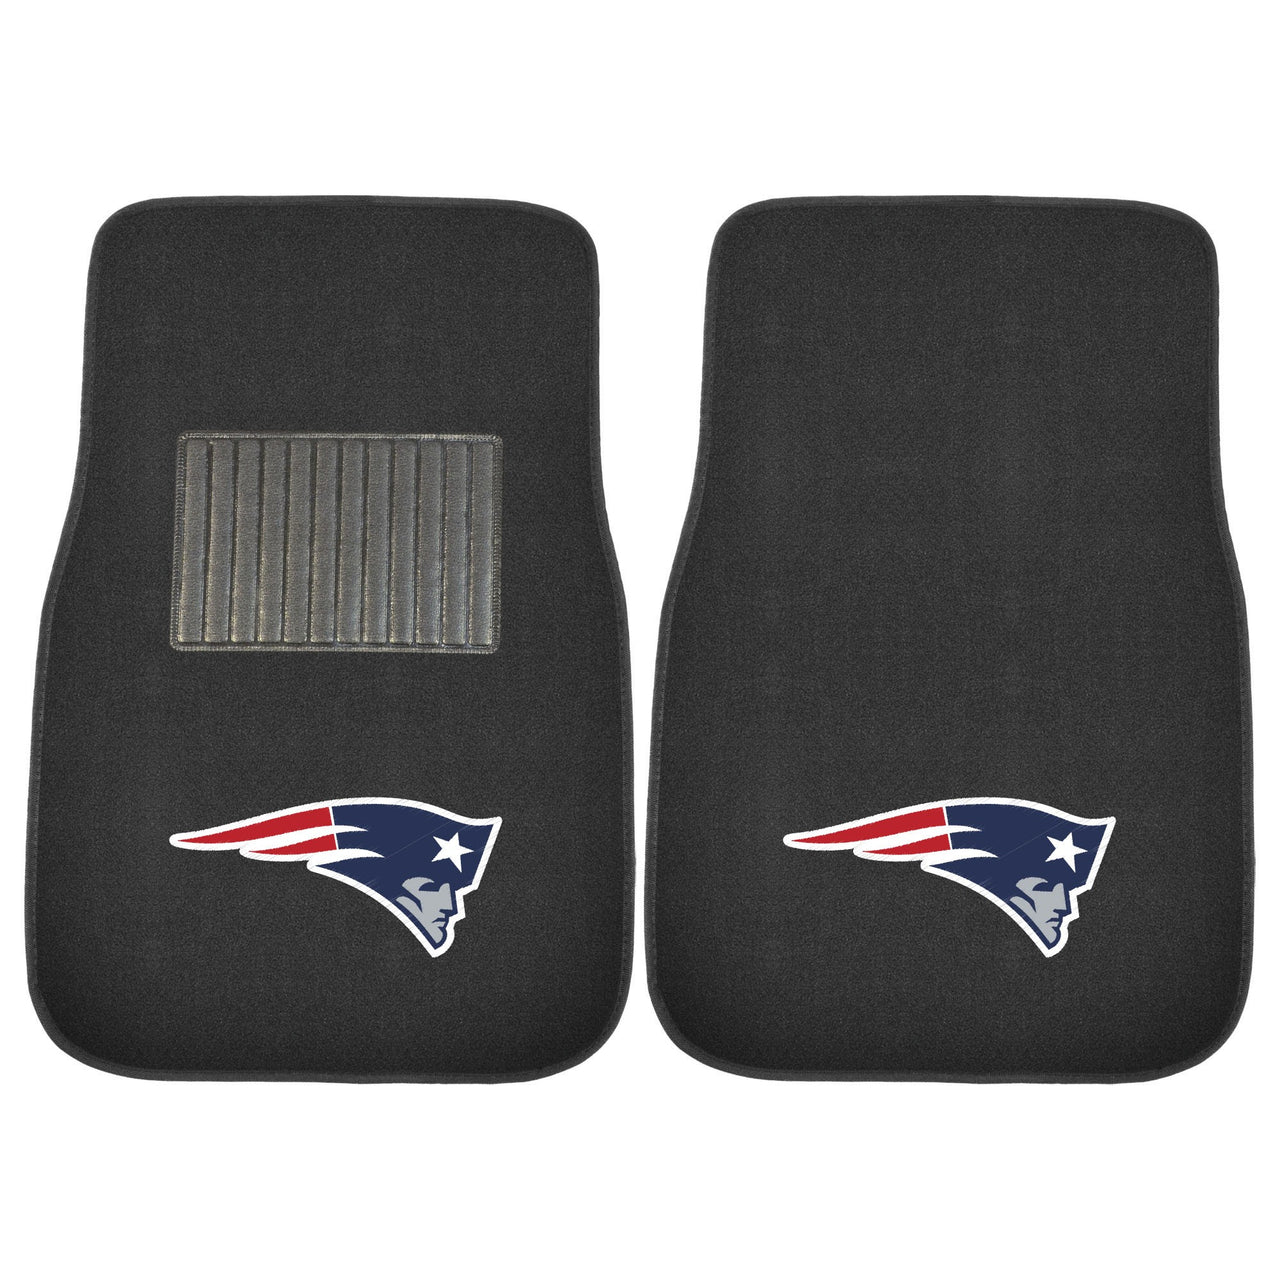 New England Patriots NFL Football 2 Piece Embroidered Car Mat Set - Dynasty Sports & Framing 